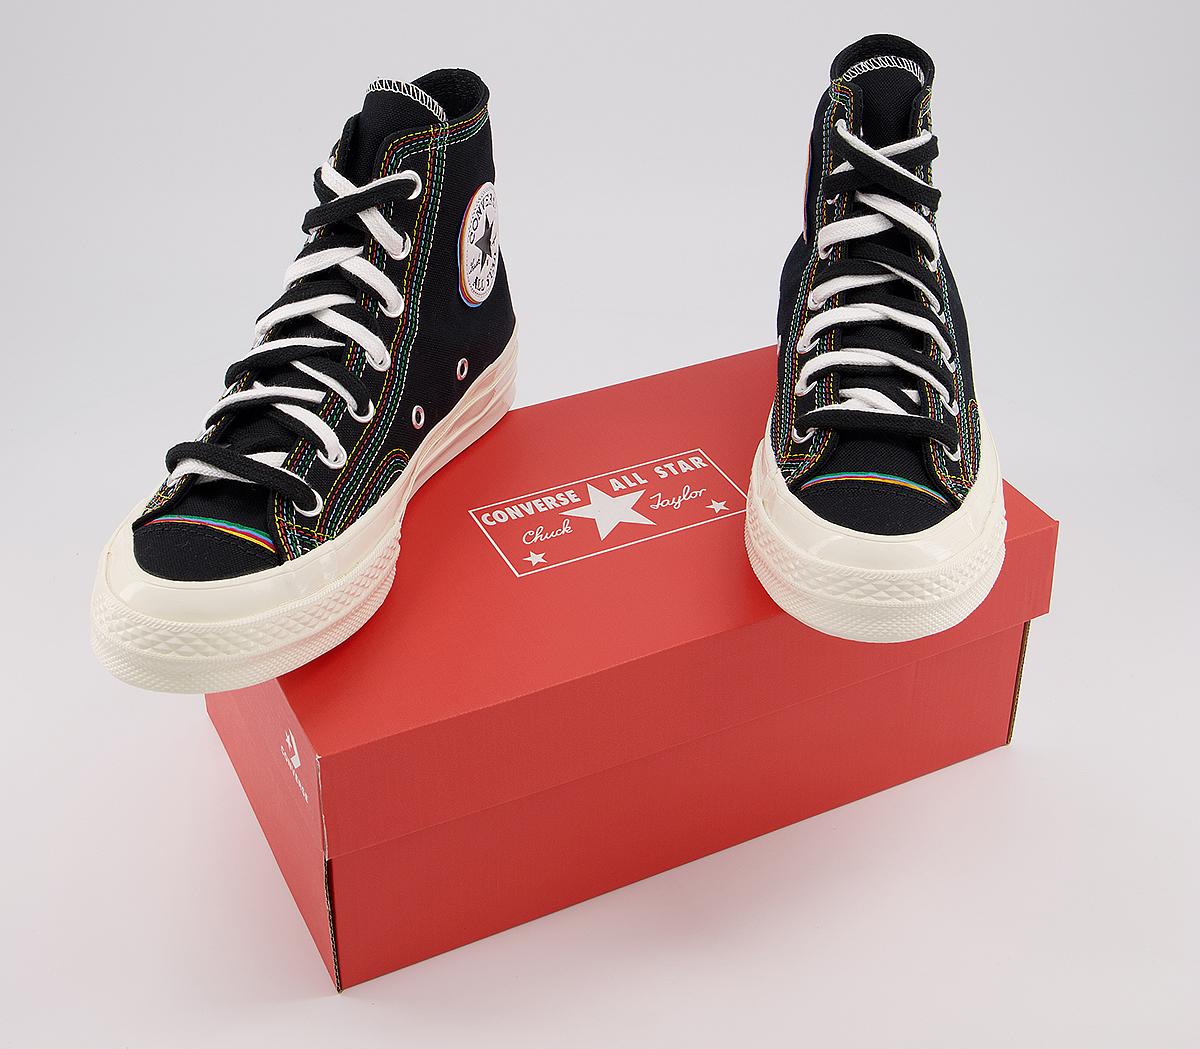 Converse All Star Hi 70 S Trainers Black Multi Egret Layers Exclusive ...